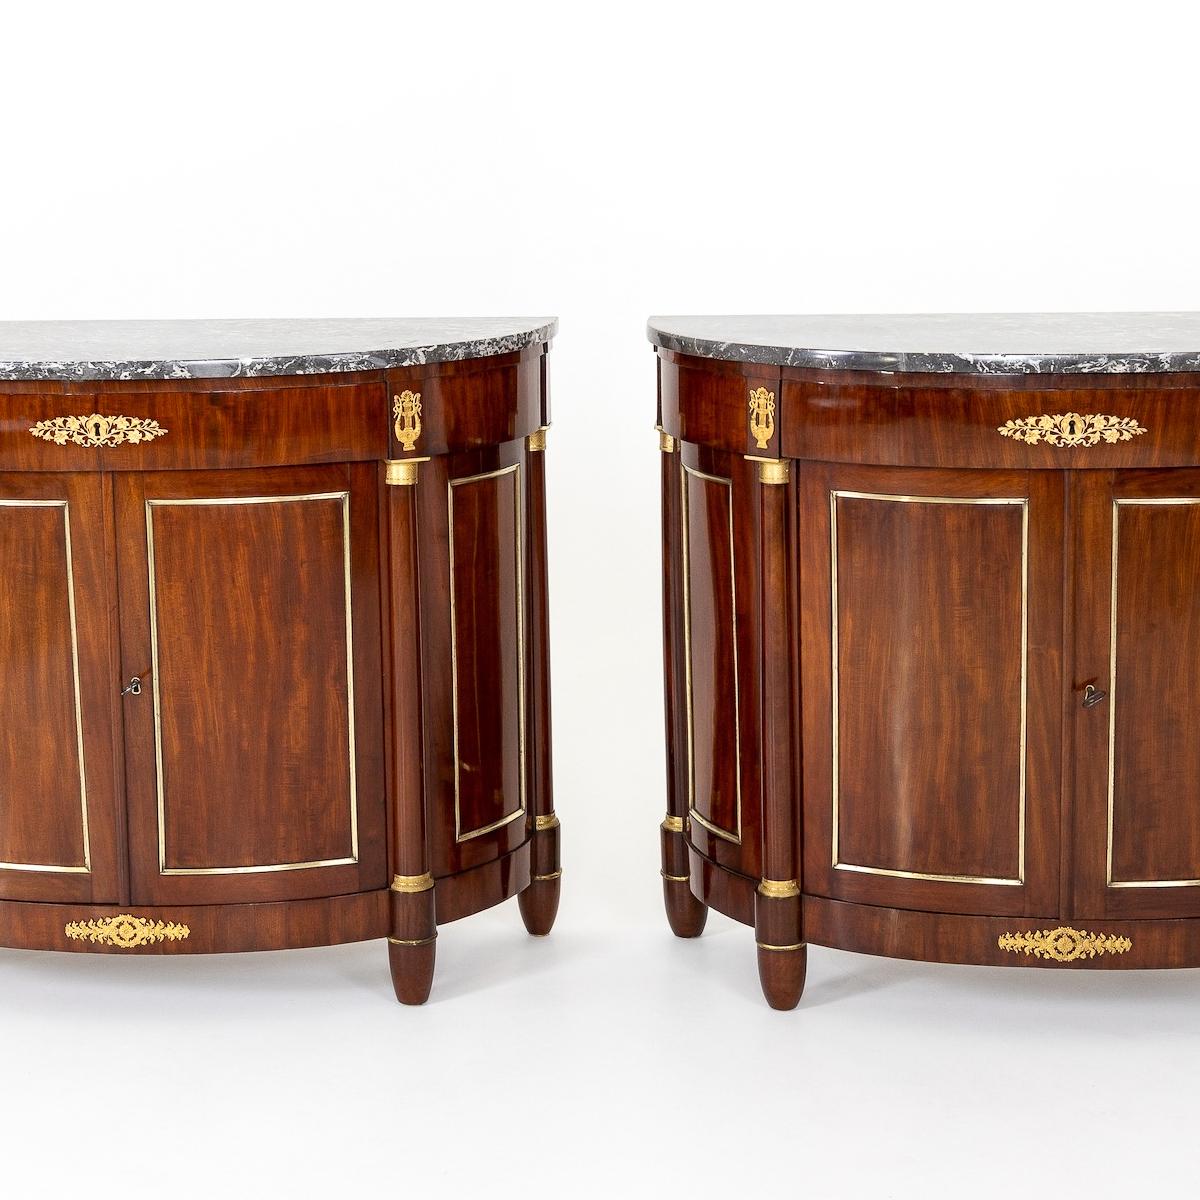 Two-door demi lune sideboards on conical feet with grey and white marble tops and bronze fittings in the form of lyre and floral motifs. The panels are framed with brass mouldings and are articulated by half-columns with bronze bases and capitals.